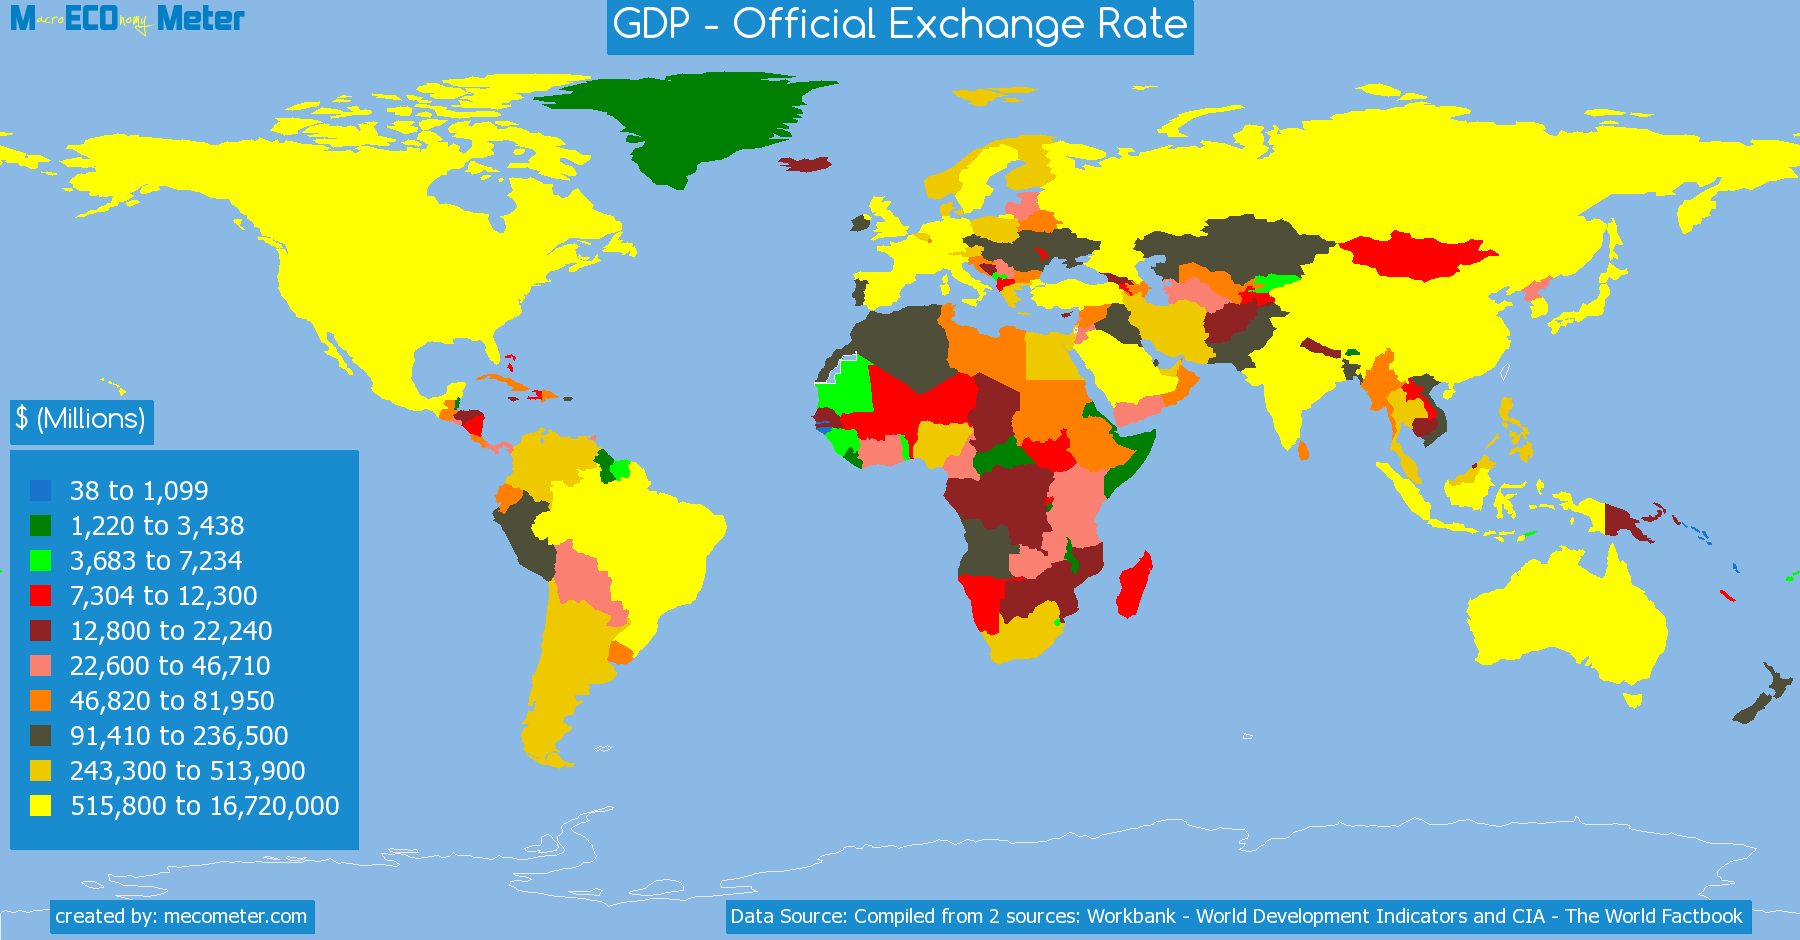 list of countries by GDP - Official Exchange Rate